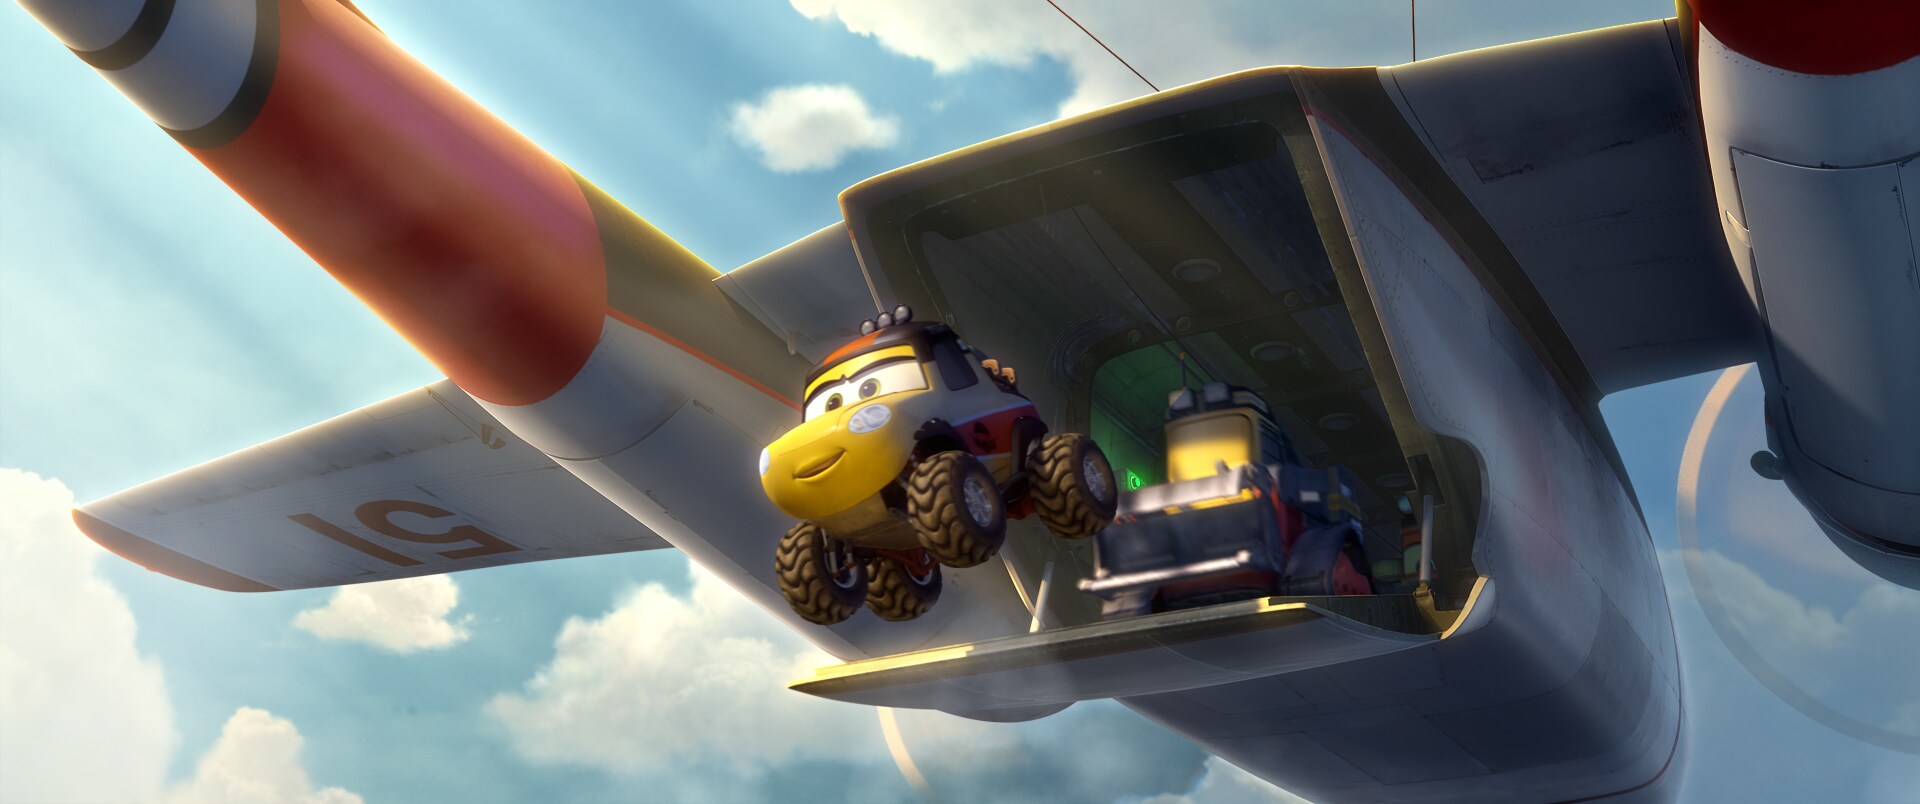 Dusty Crophopper ( Dane Cook) in the movie Planes: Fire & Rescue